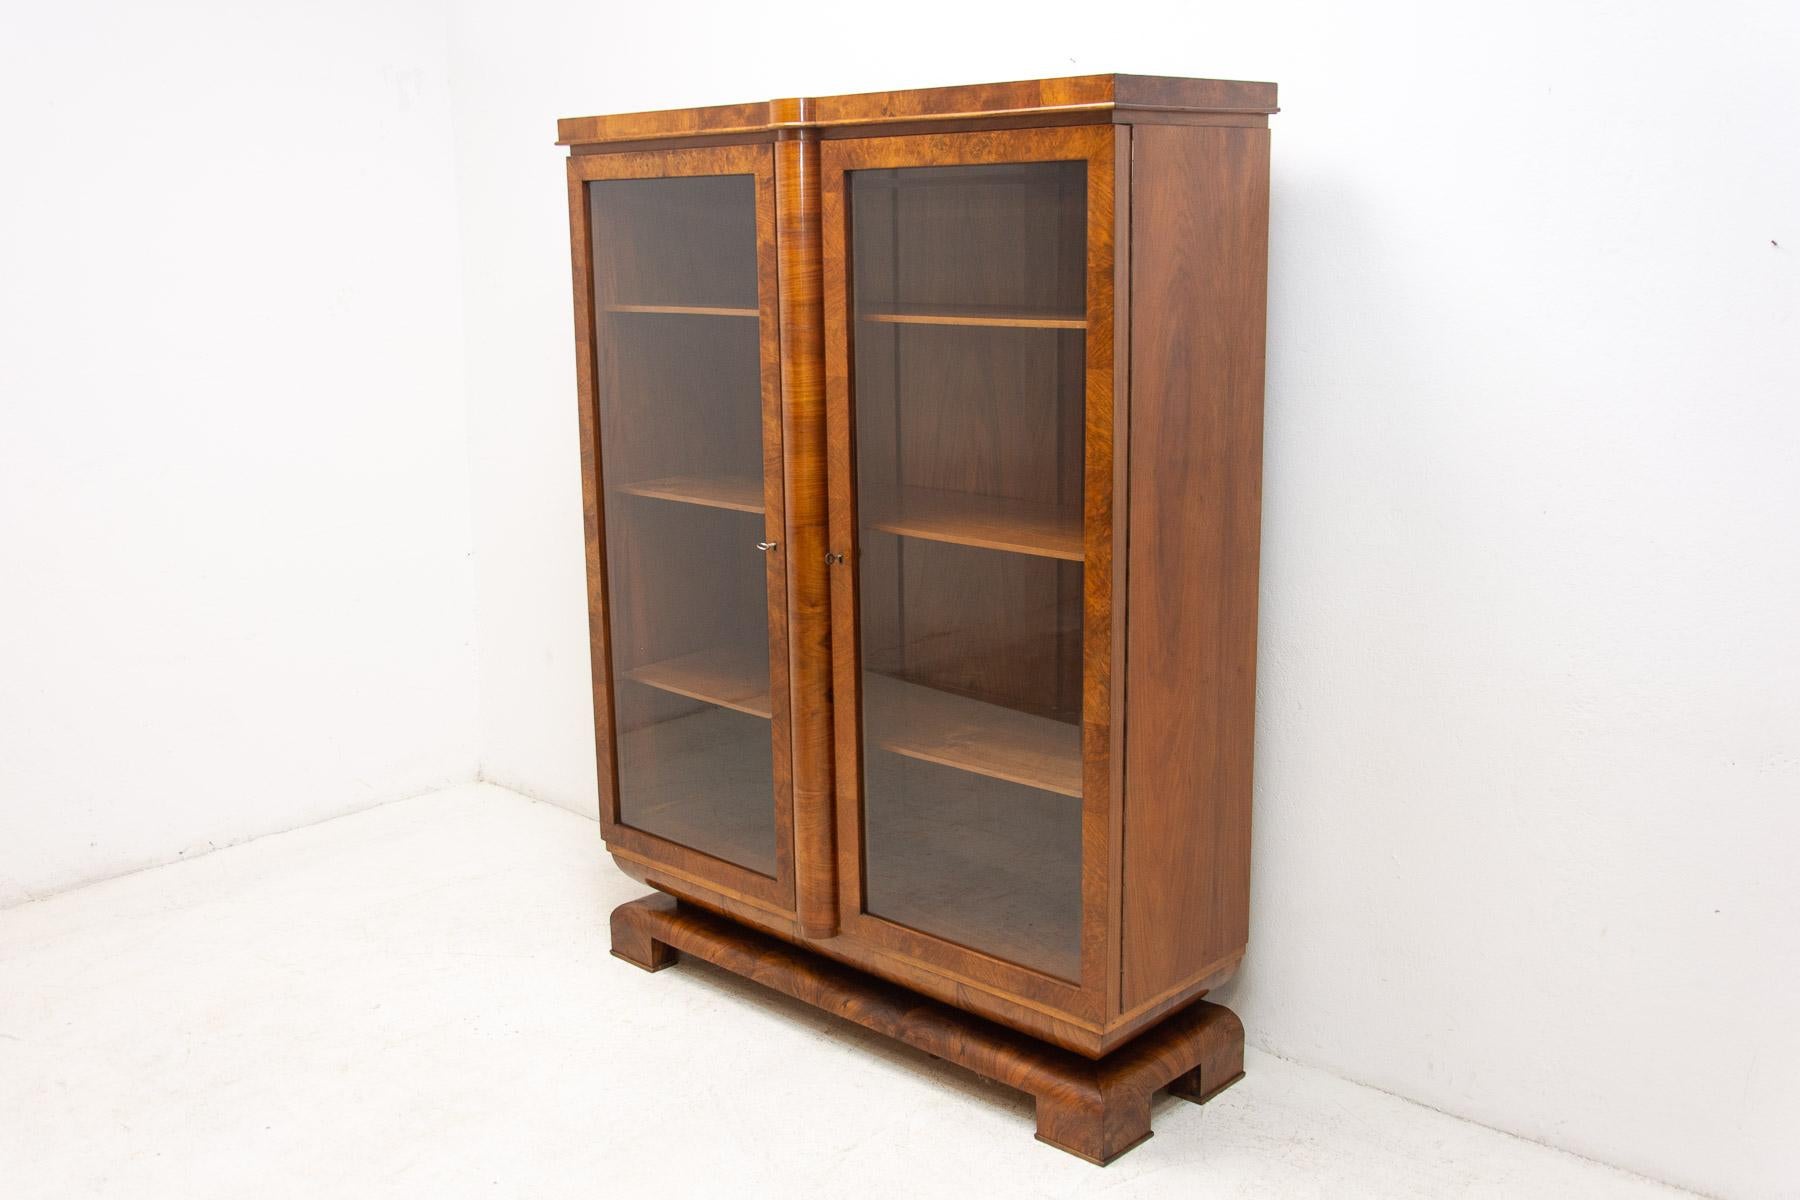 Art Deco Library cabinet, made in the 1930s in Bohemia. It features a regular shapes, a solid structure, and a geometric base on which the library stands. It´s made of walnut wood.
In very good Vintage condition, showing slight signs of age and